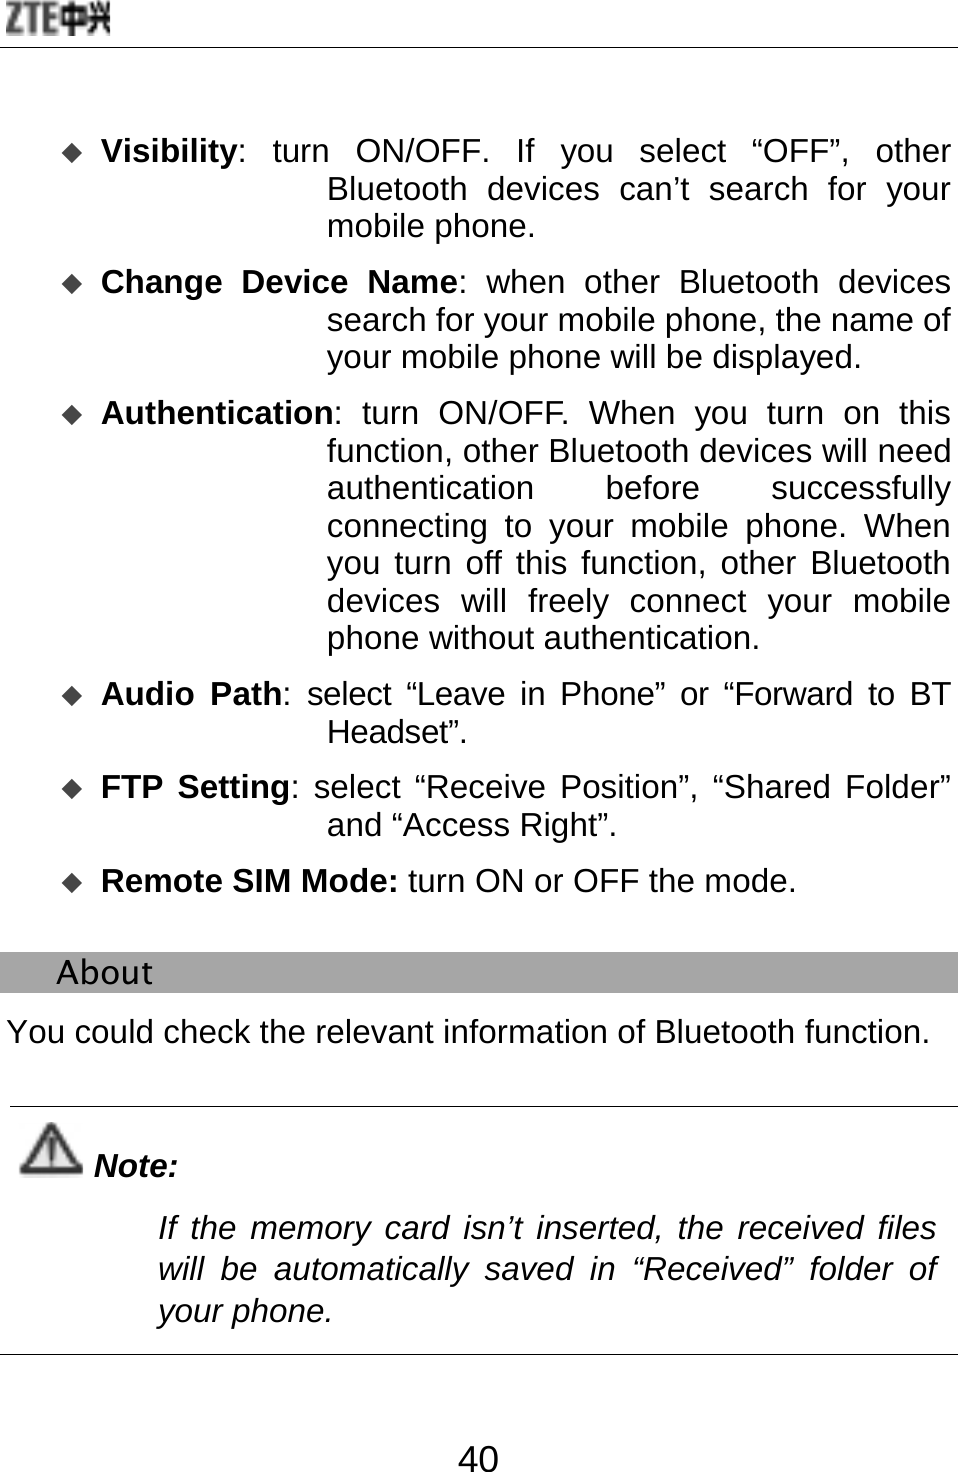  40  Visibility: turn ON/OFF. If you select “OFF”, other Bluetooth devices can’t search for your mobile phone.  Change Device Name: when other Bluetooth devices search for your mobile phone, the name of your mobile phone will be displayed.    Authentication: turn ON/OFF. When you turn on this function, other Bluetooth devices will need authentication before successfully connecting to your mobile phone. When you turn off this function, other Bluetooth devices will freely connect your mobile phone without authentication.  Audio Path: select “Leave in Phone” or “Forward to BT Headset”.   FTP Setting: select “Receive Position”, “Shared Folder” and “Access Right”.  Remote SIM Mode: turn ON or OFF the mode.   About You could check the relevant information of Bluetooth function.  Note: If the memory card isn’t inserted, the received files will be automatically saved in “Received” folder of your phone.  